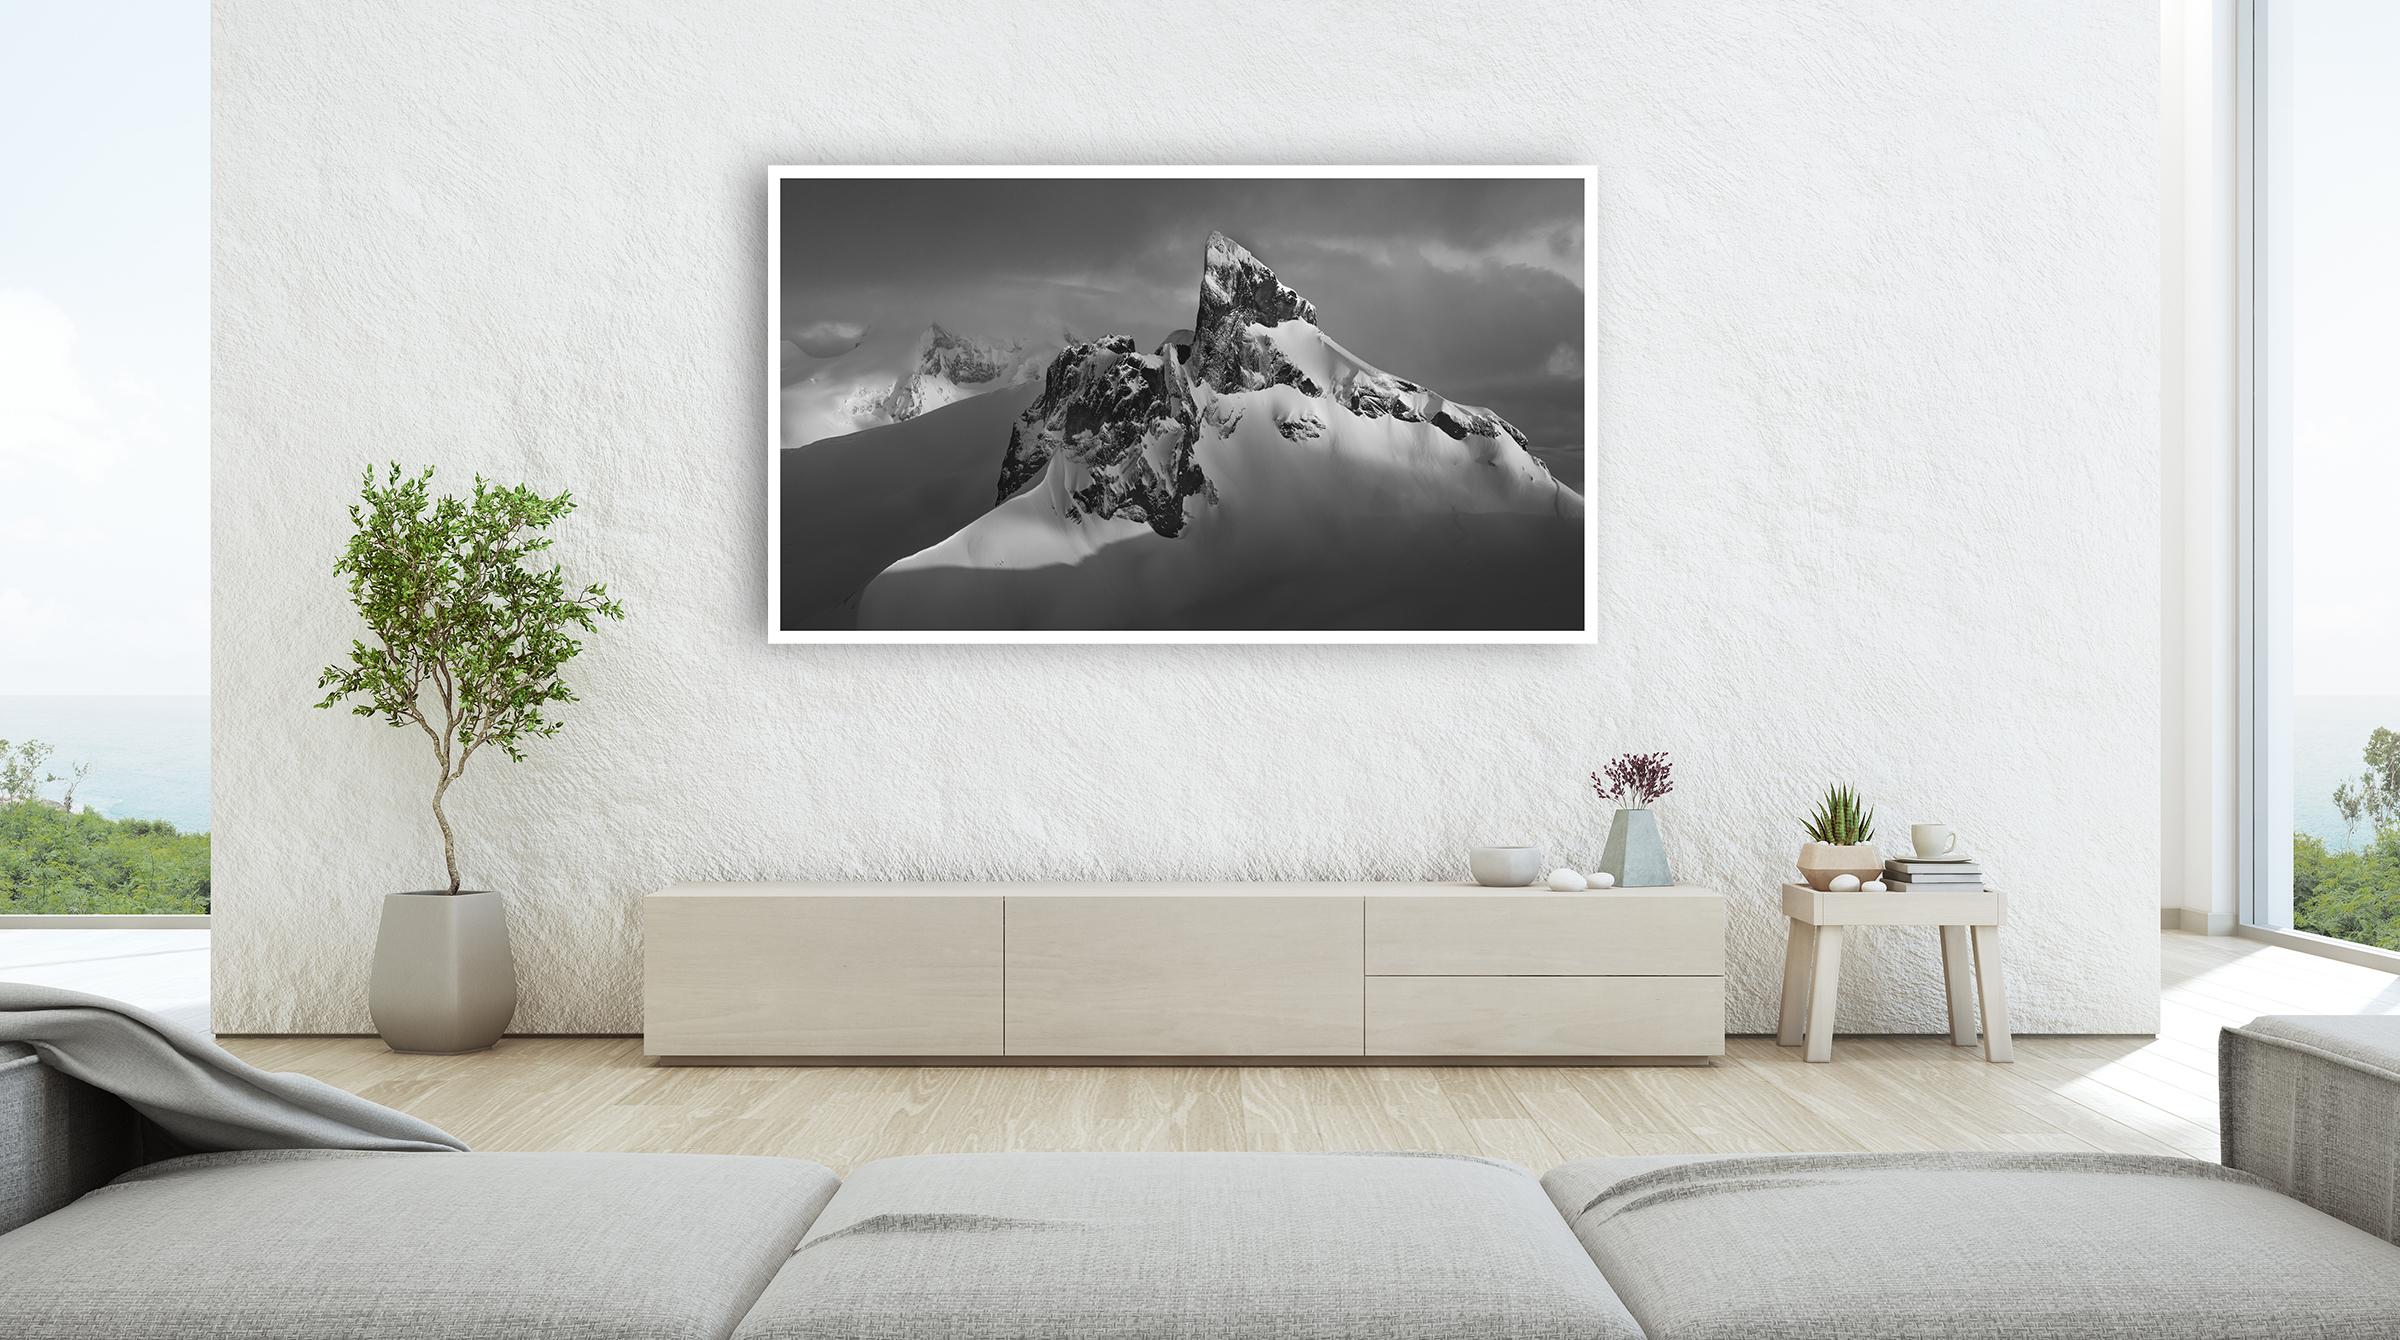 Black Tusk #72, Canada black and white, contemporary, landscape photograph  - Other Art Style Photograph by Jussi Grznar 